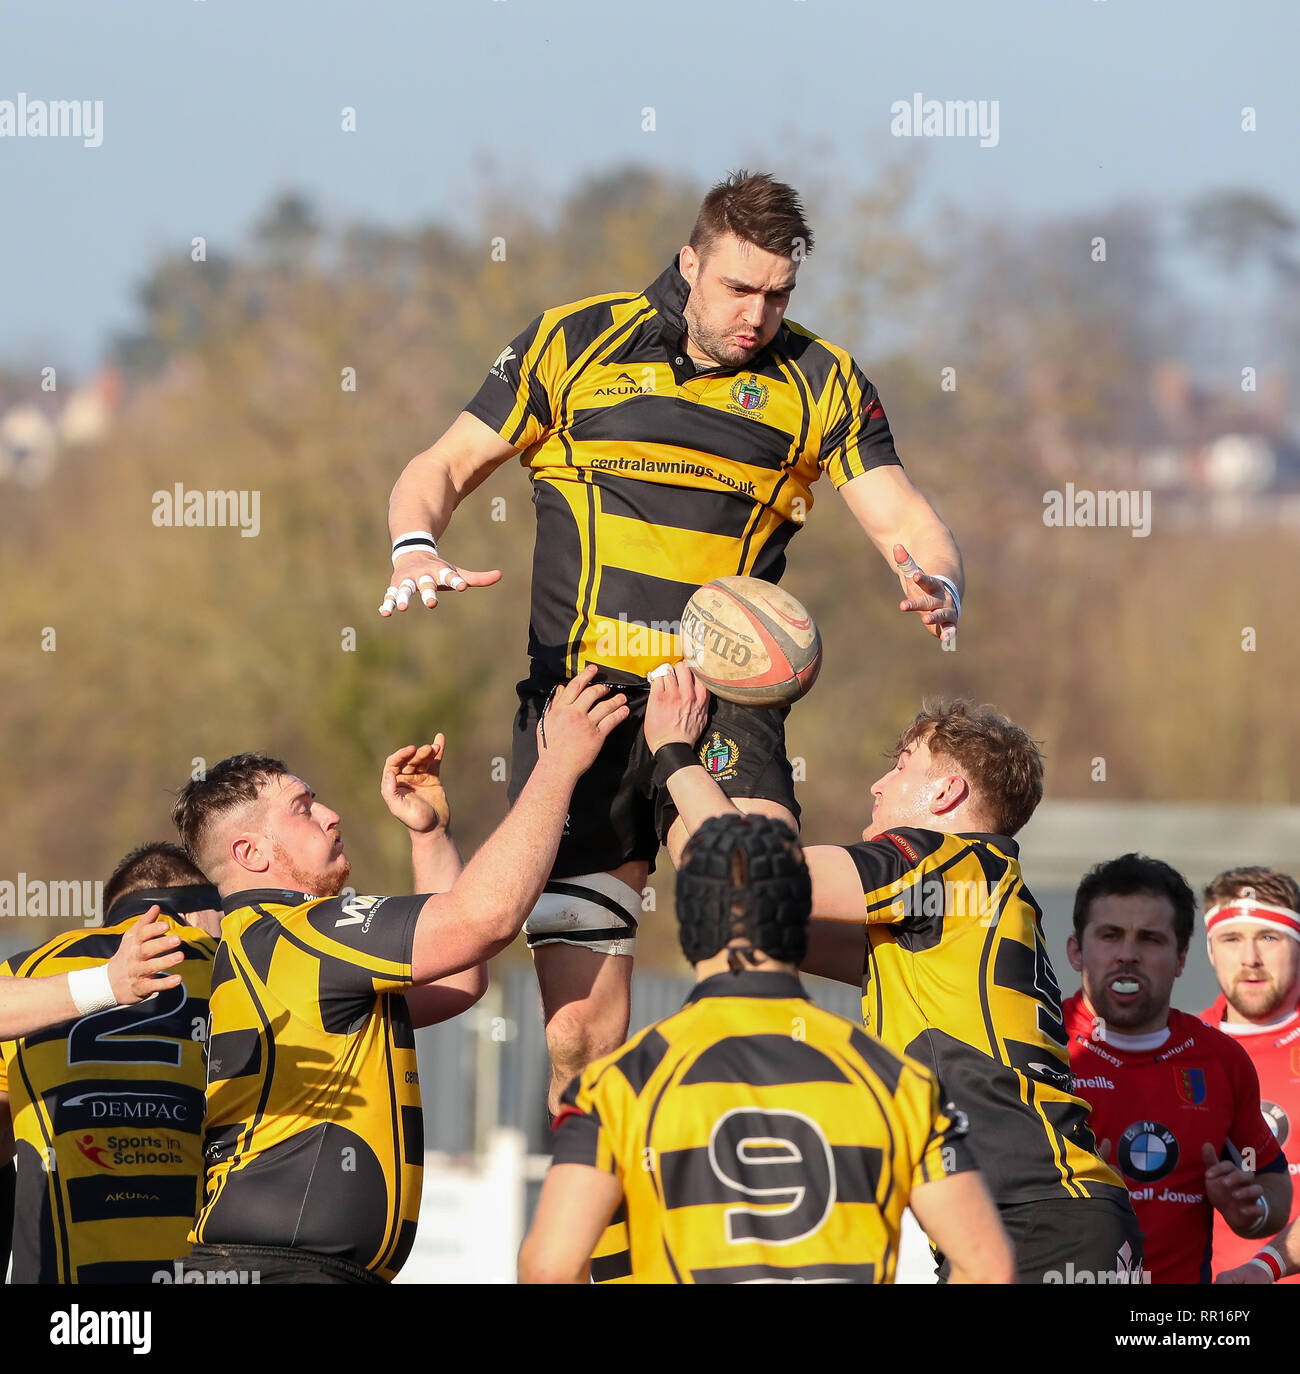 23.02.2019 Hinckley, Leicester, England. Rugby Union, Hinckley rfc v Chester rfc.   Ben Marshall takes the line out for Hinckley during the RFU Nation Stock Photo